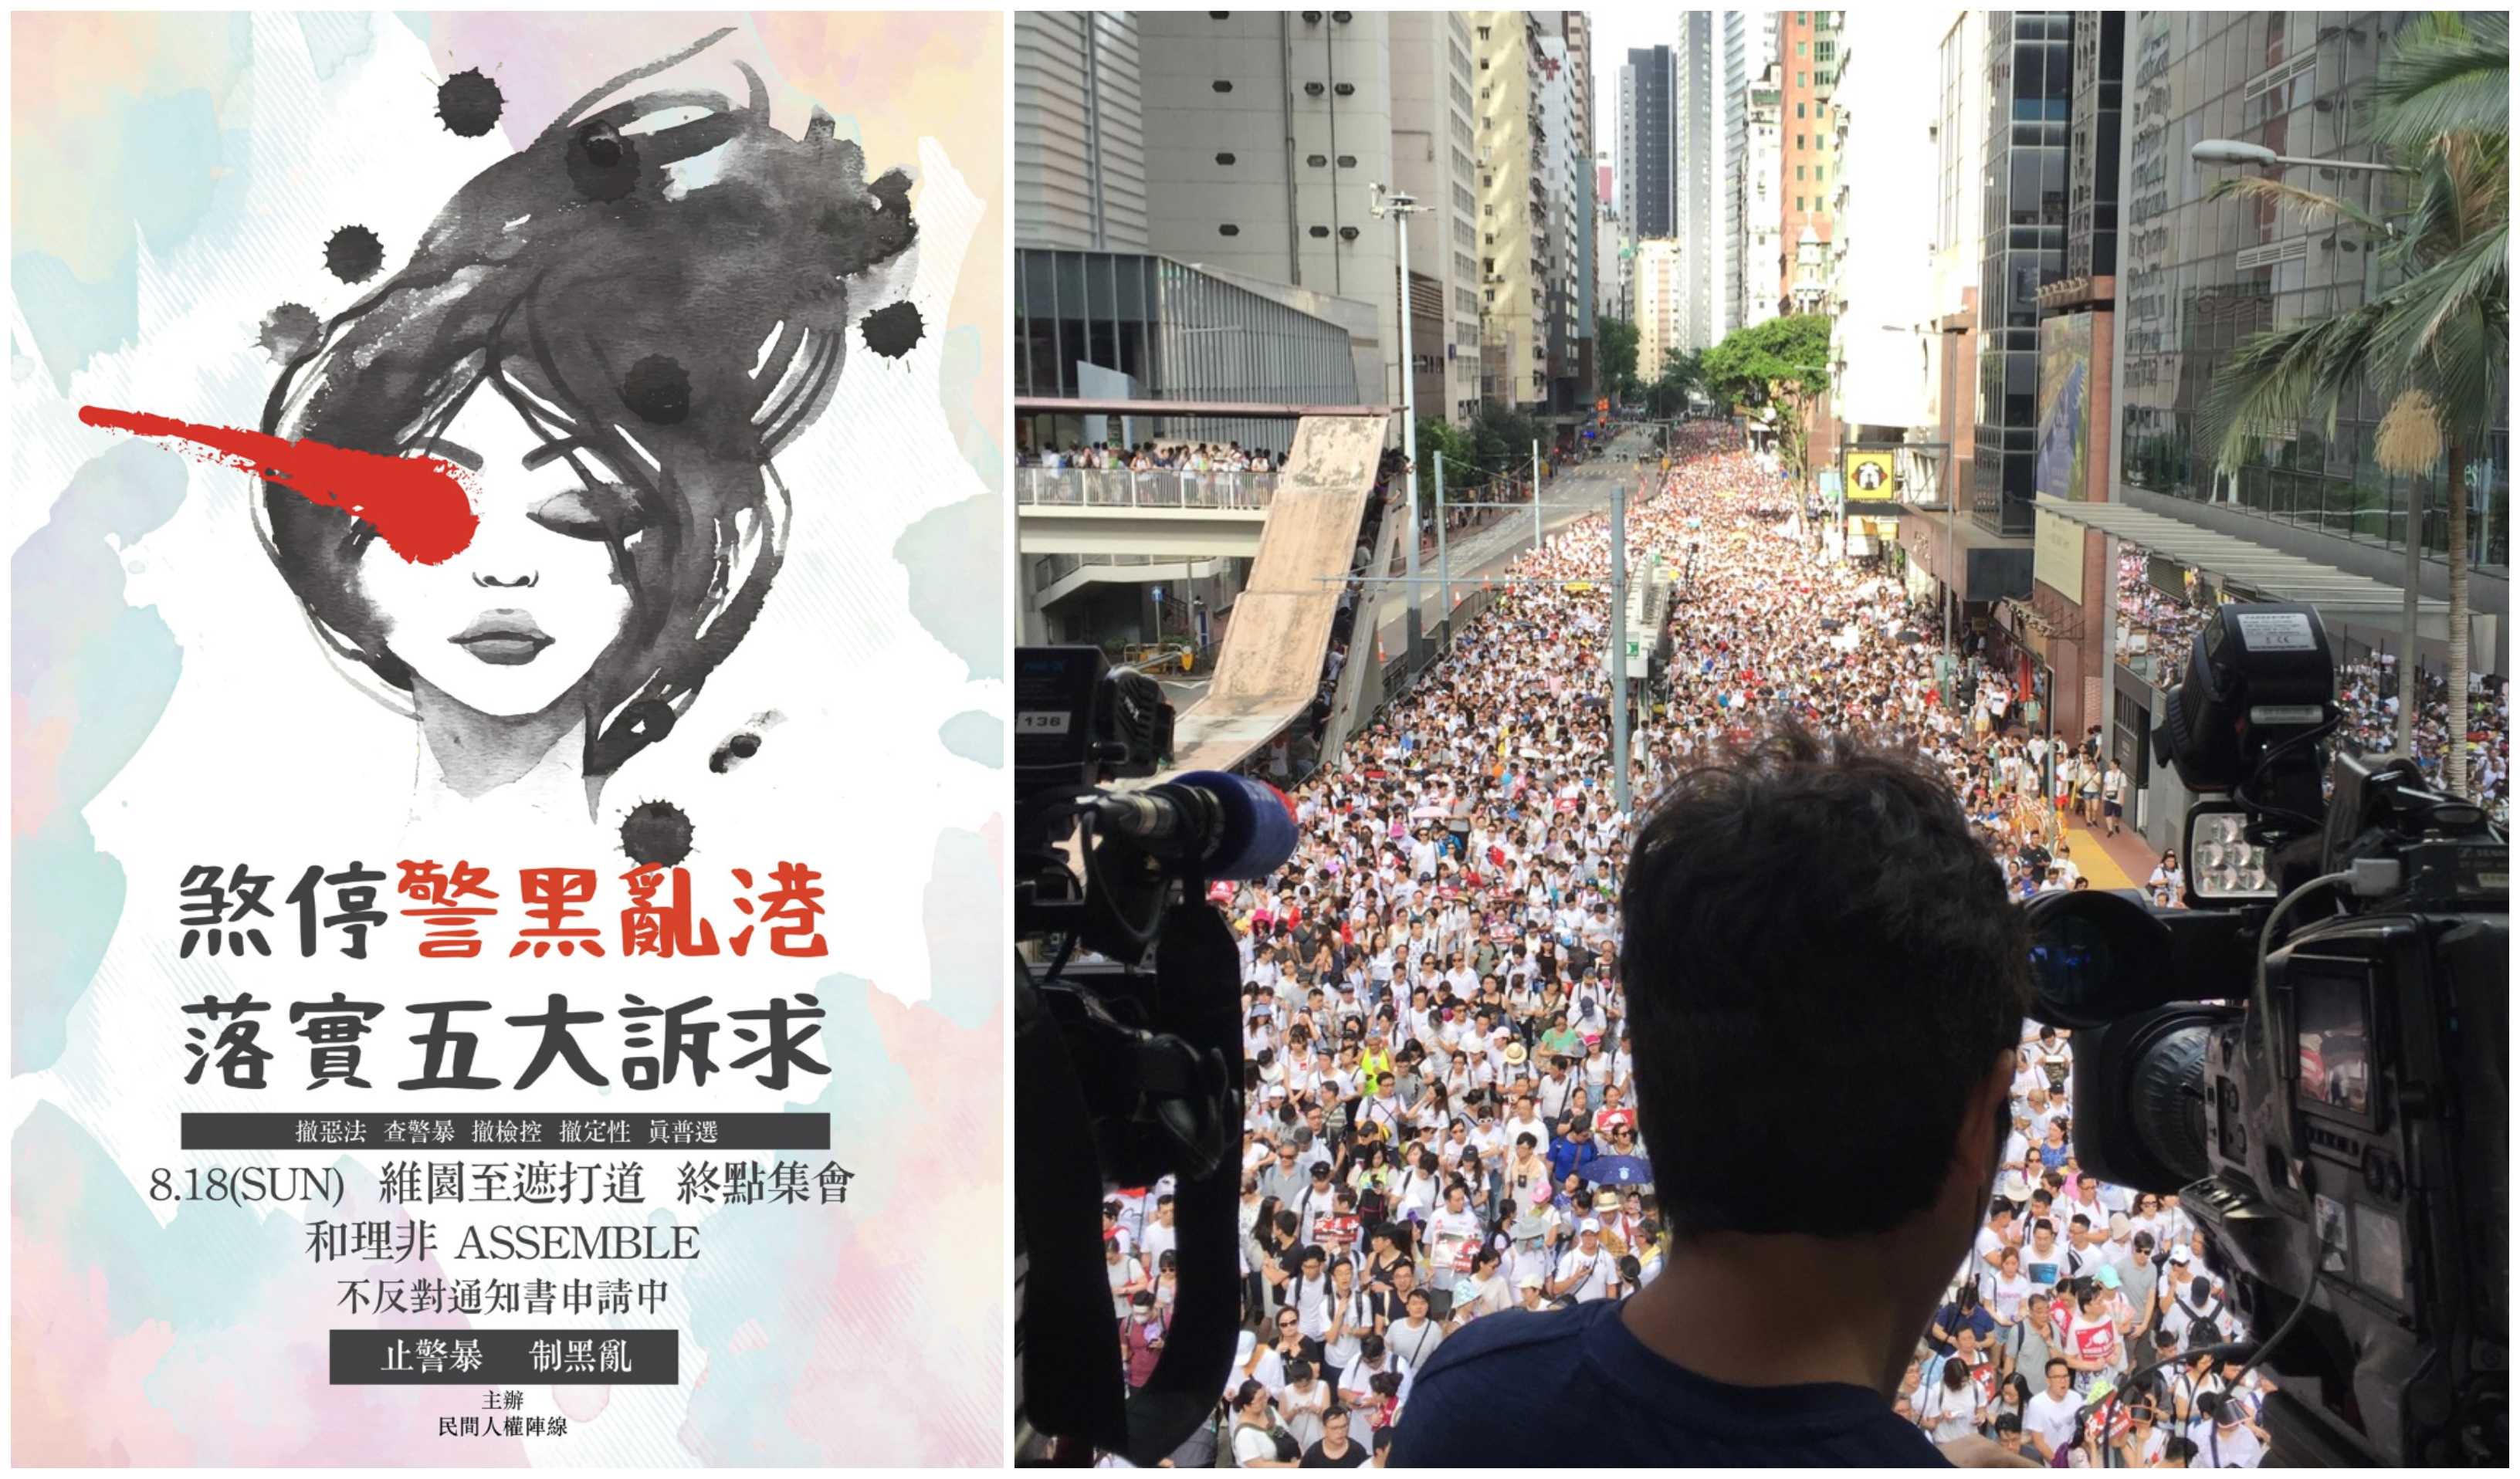 A poster promoting a planned CHRF march on Sunday (left), and an image of the crowd that attended a similar march on June 9 that was attended by as many as one million people (right). Photos via Facebook/Stuart White.